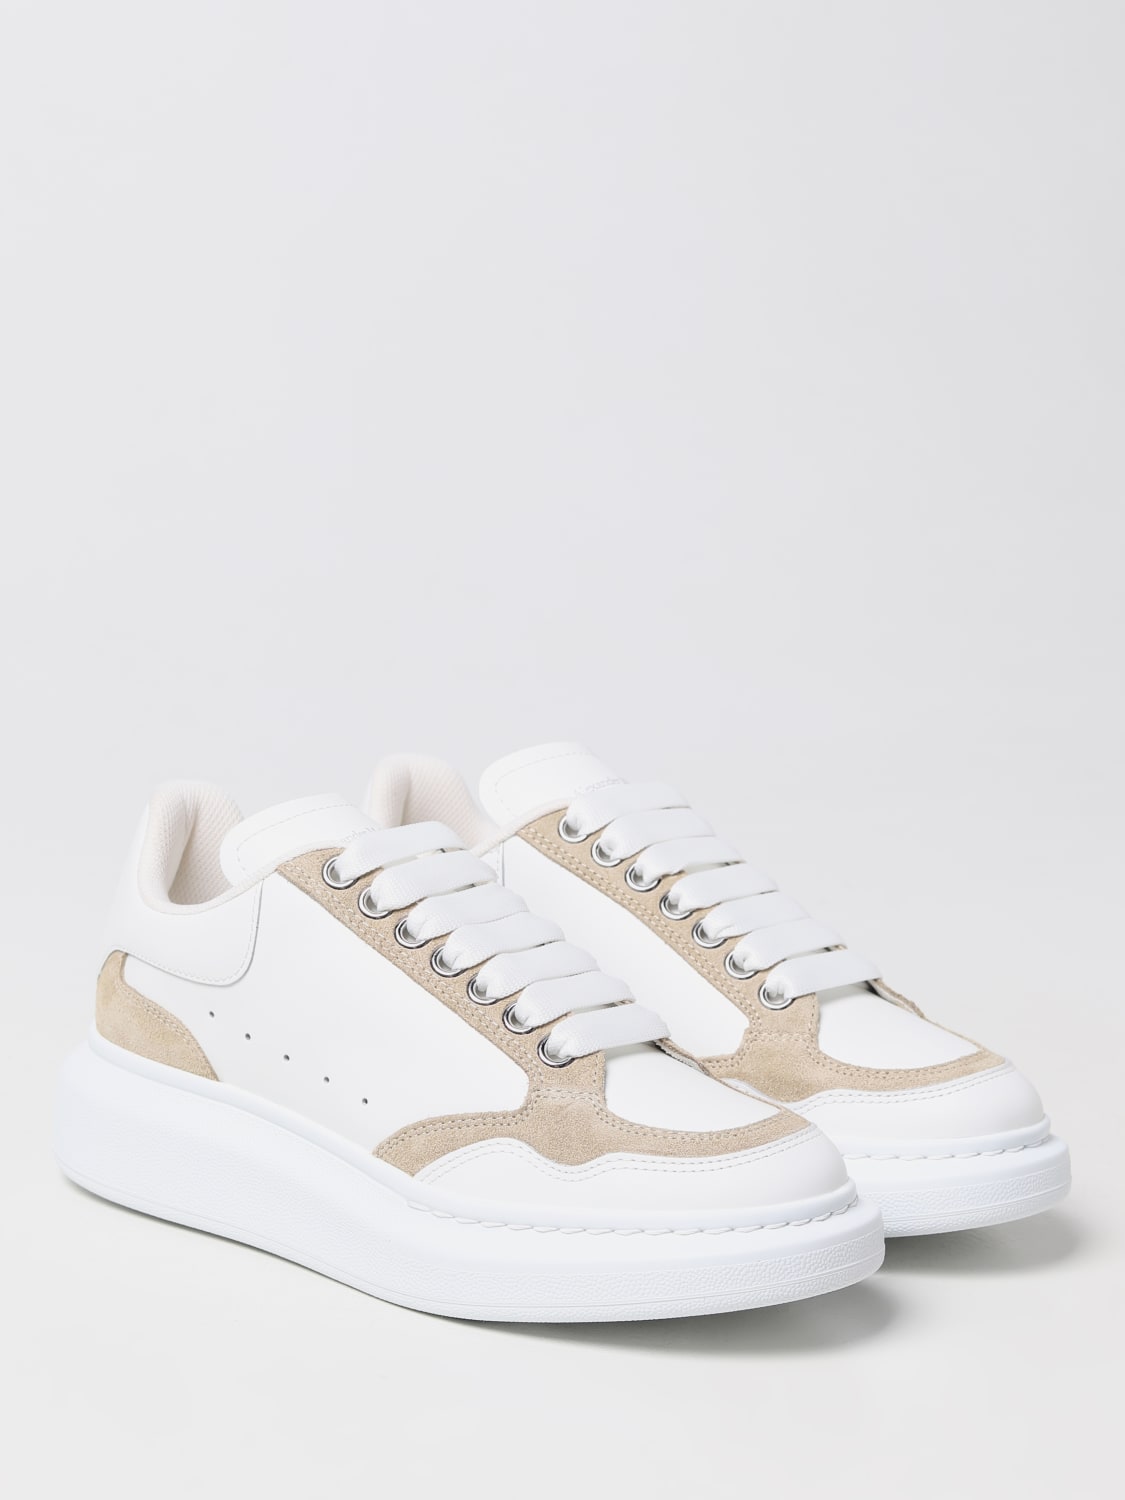 ALEXANDER MCQUEEN: Larry leather sneakers - White